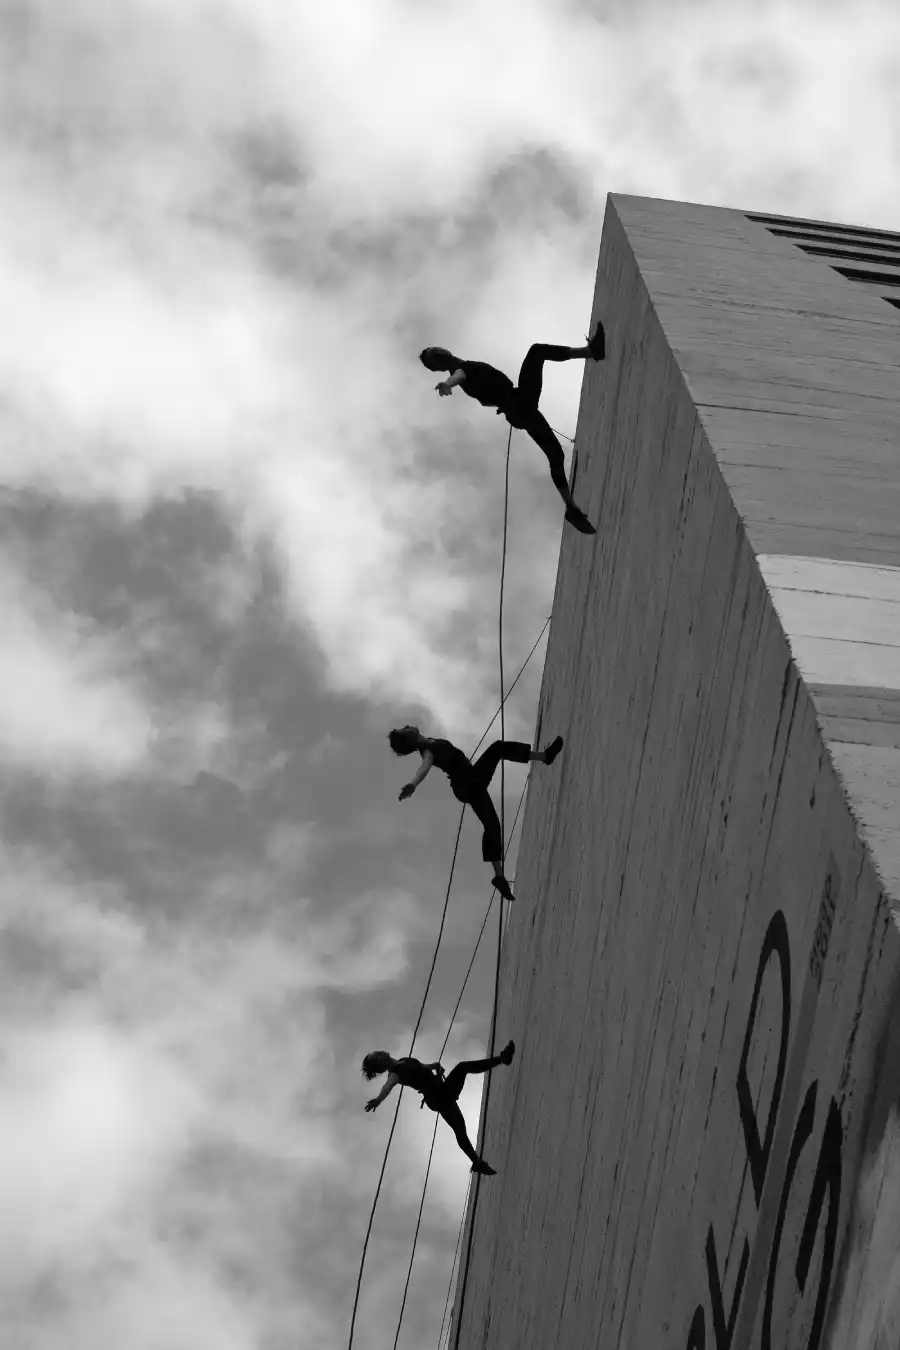 A group of people defying perfectionism, climbing a building with resilience and unity.